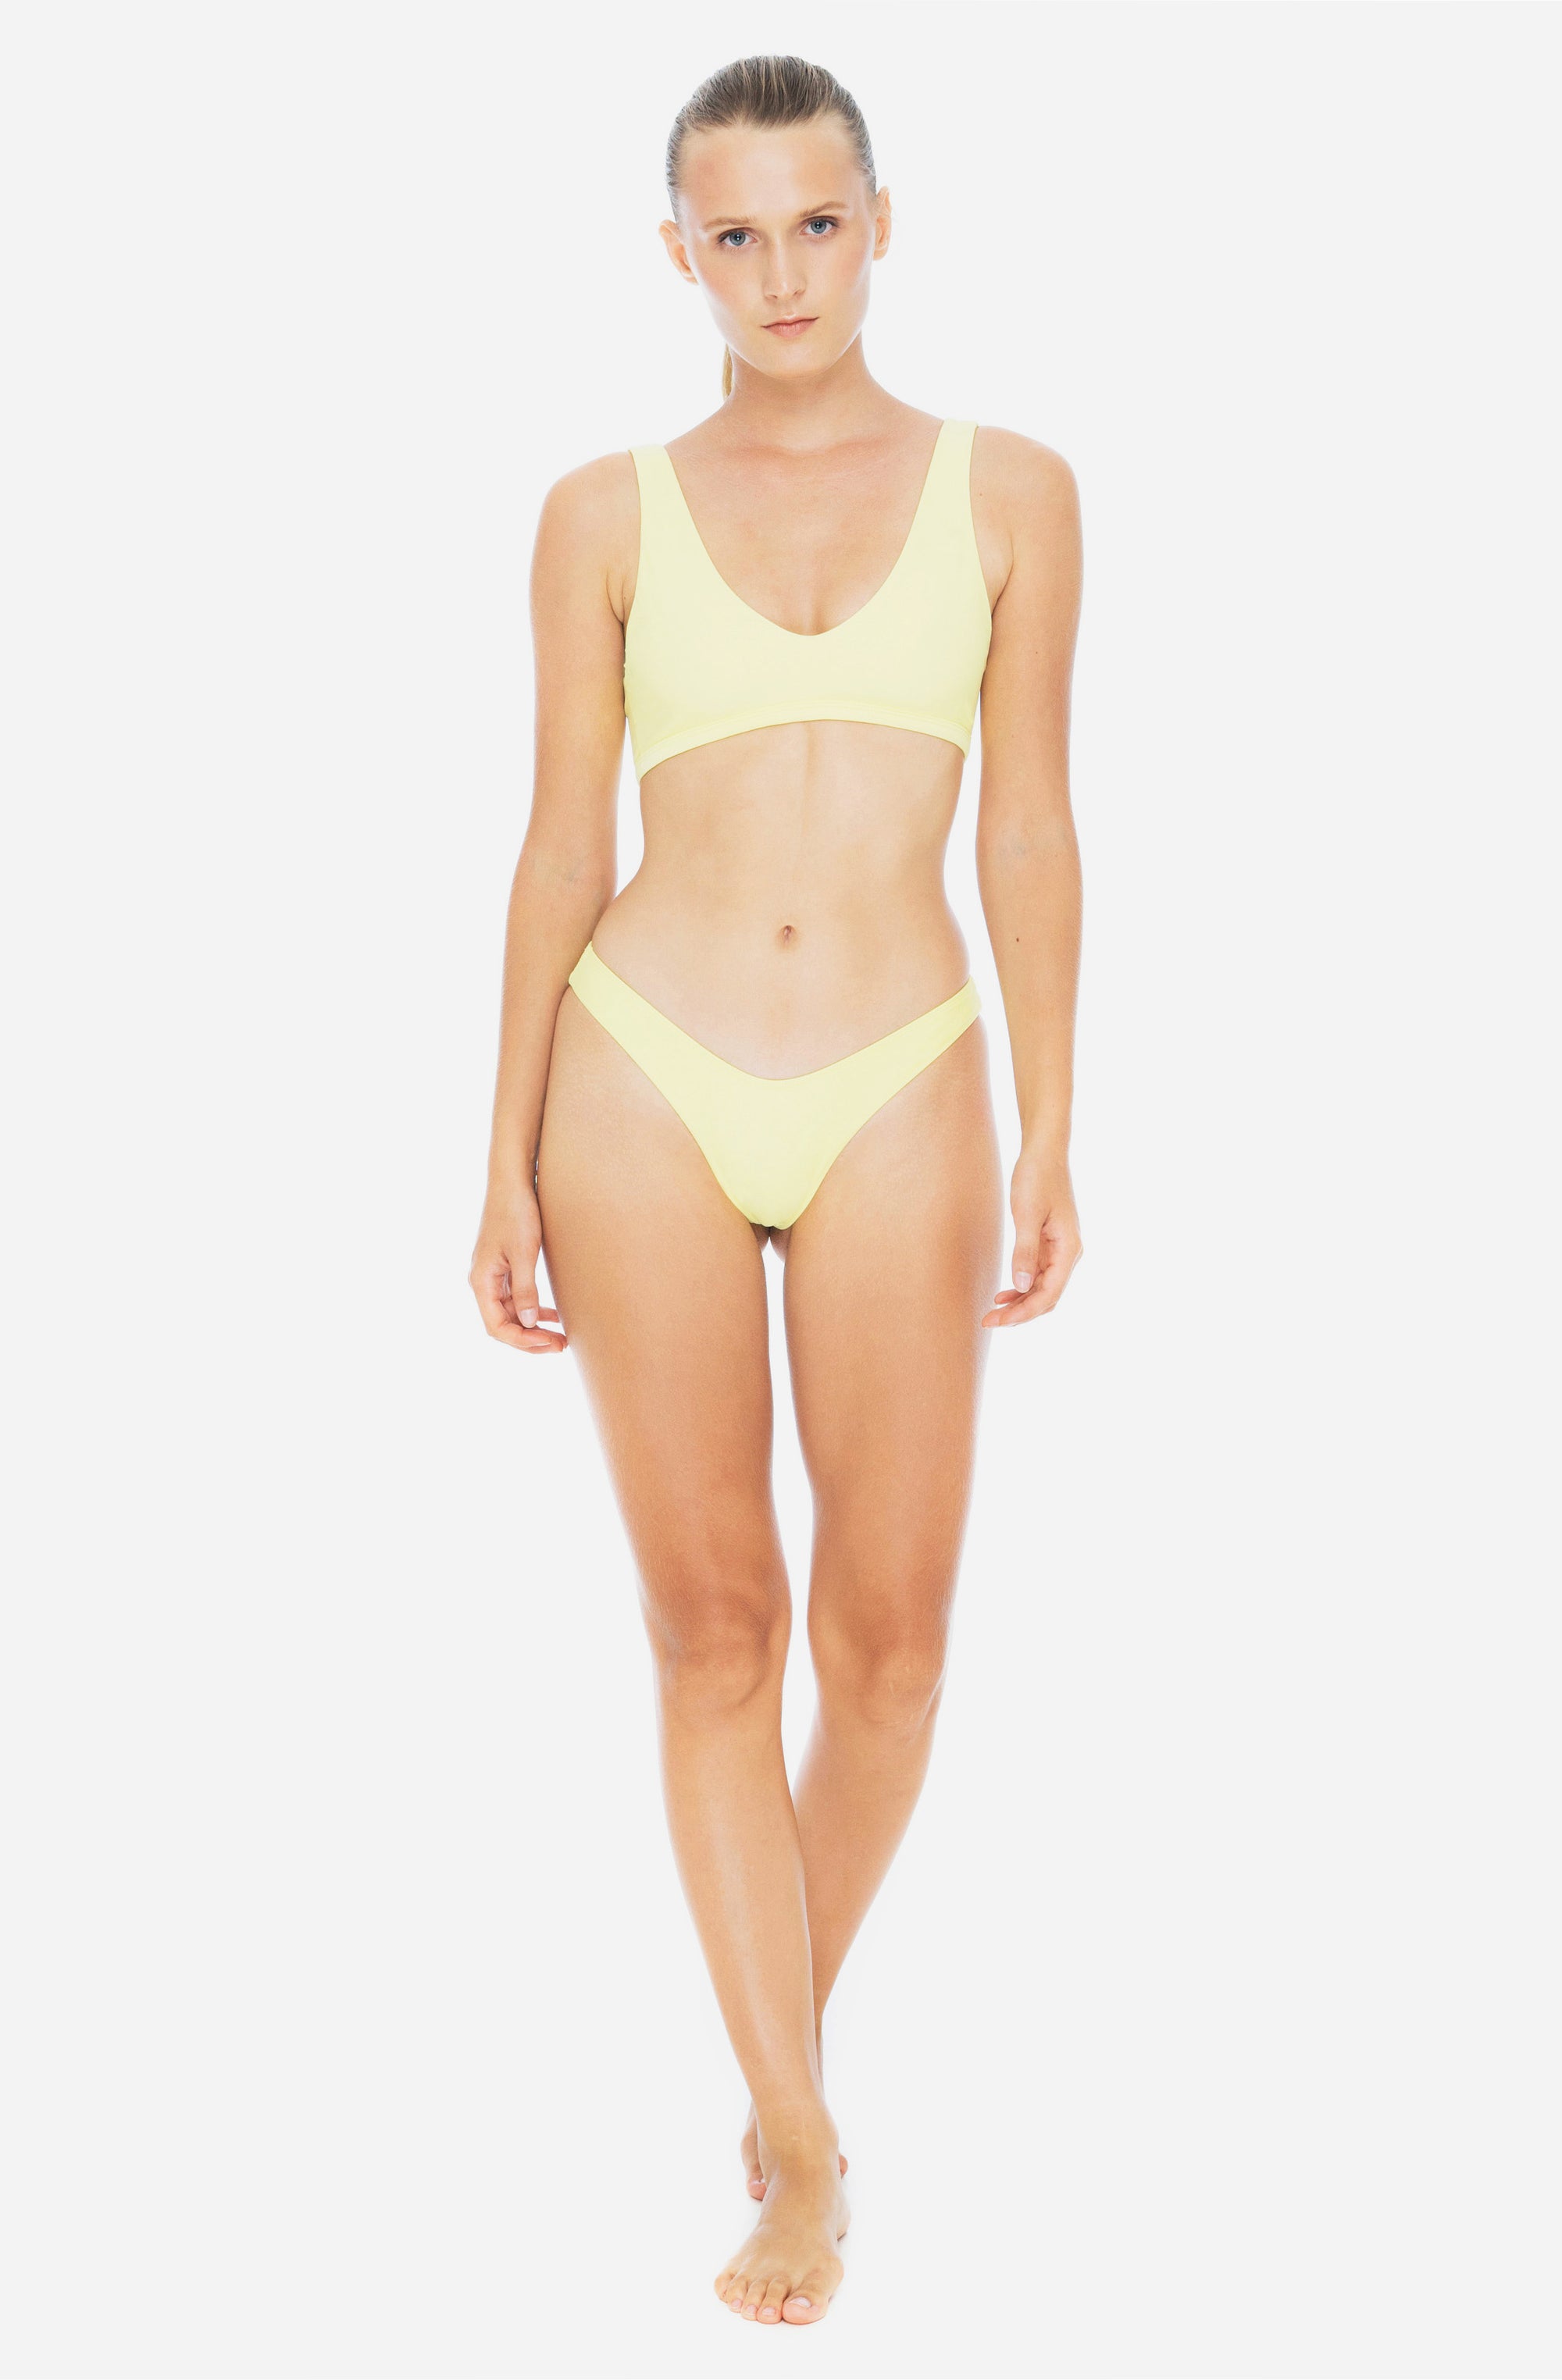 Woman modeling a triangle top surf bikini top and bottom in sunflower yellow